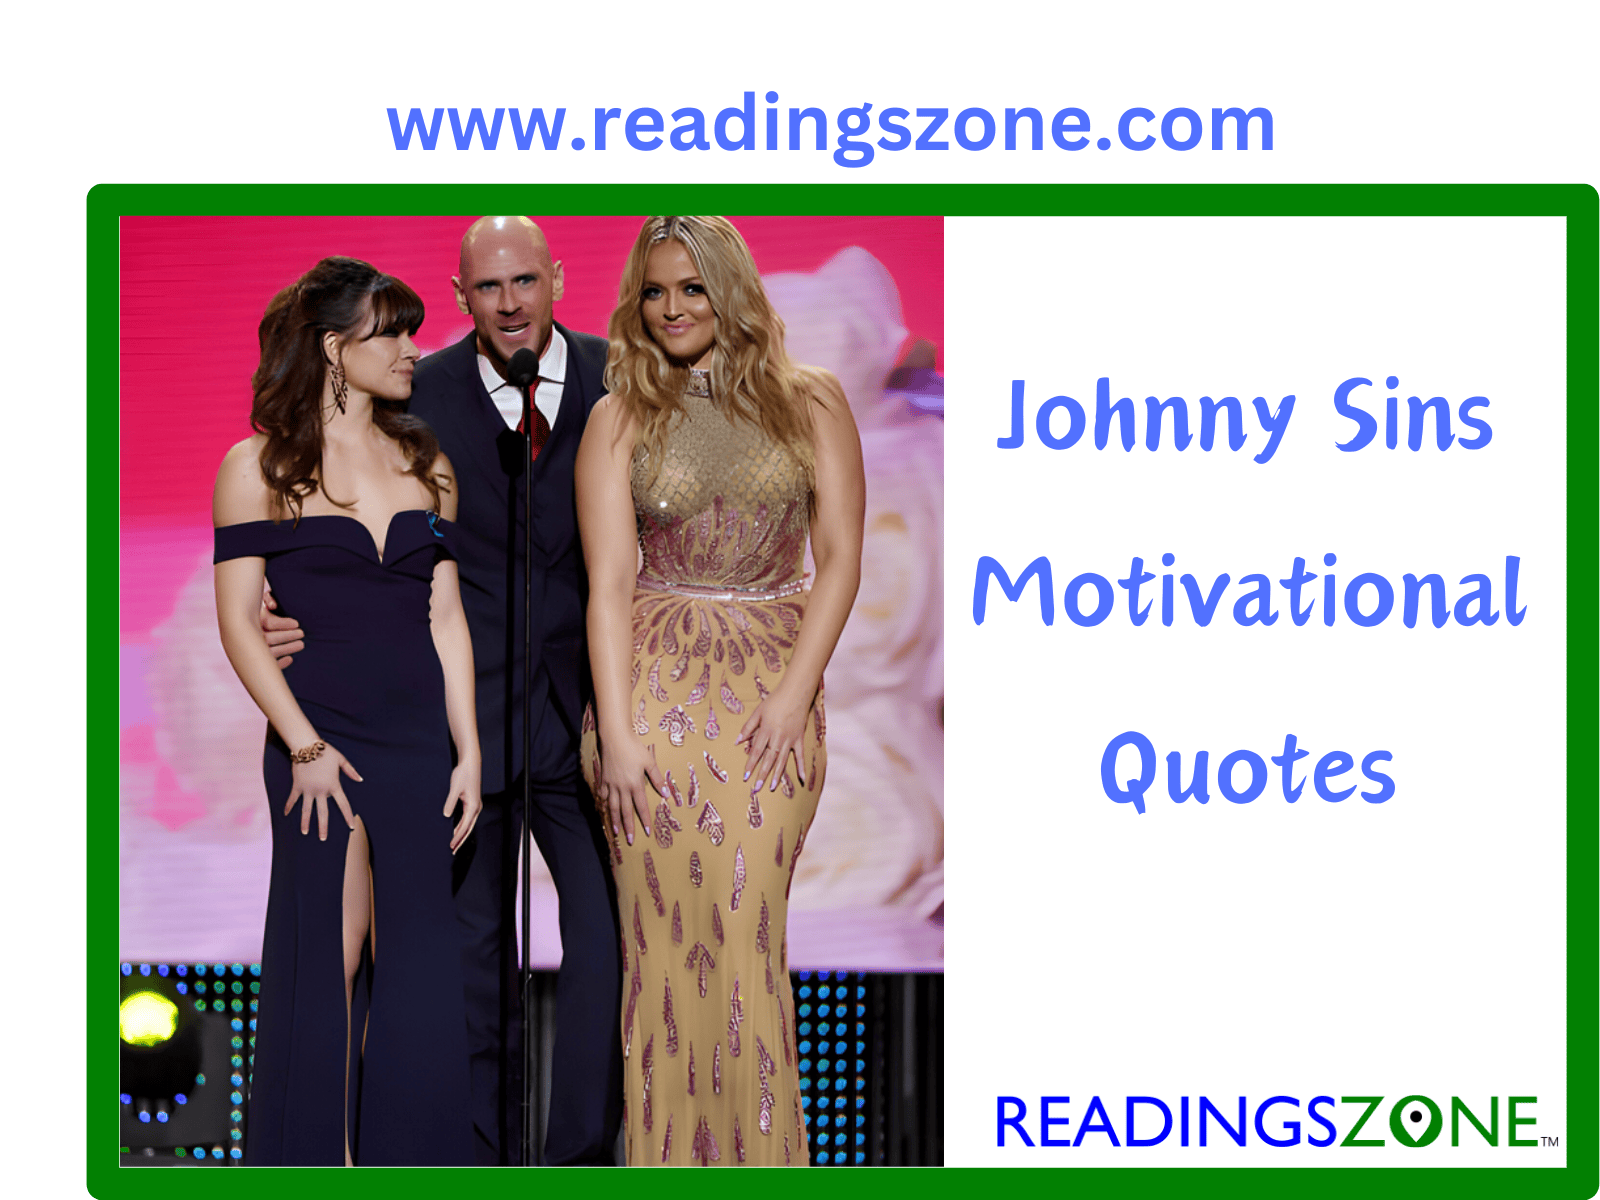 Johnny sins motivational quotes-